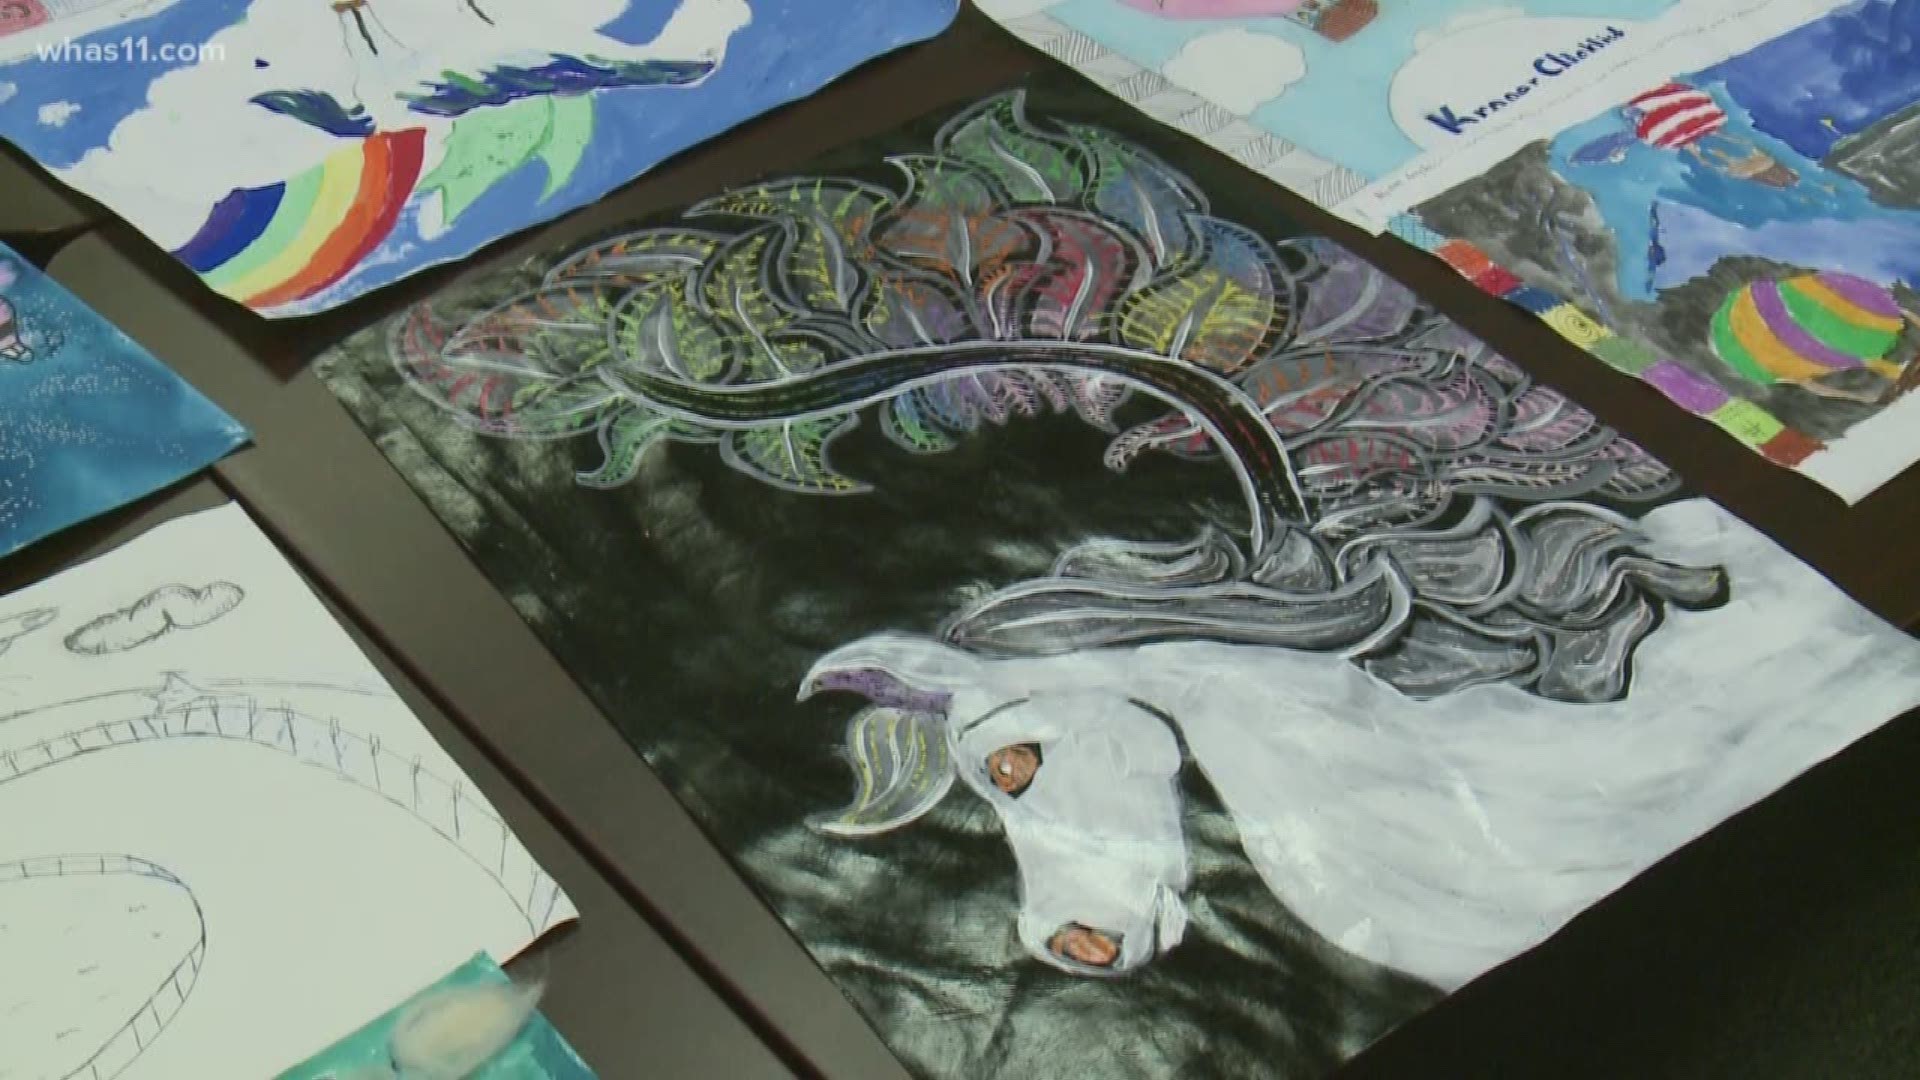 Students had the chance to show off their favorite part of Derby season.